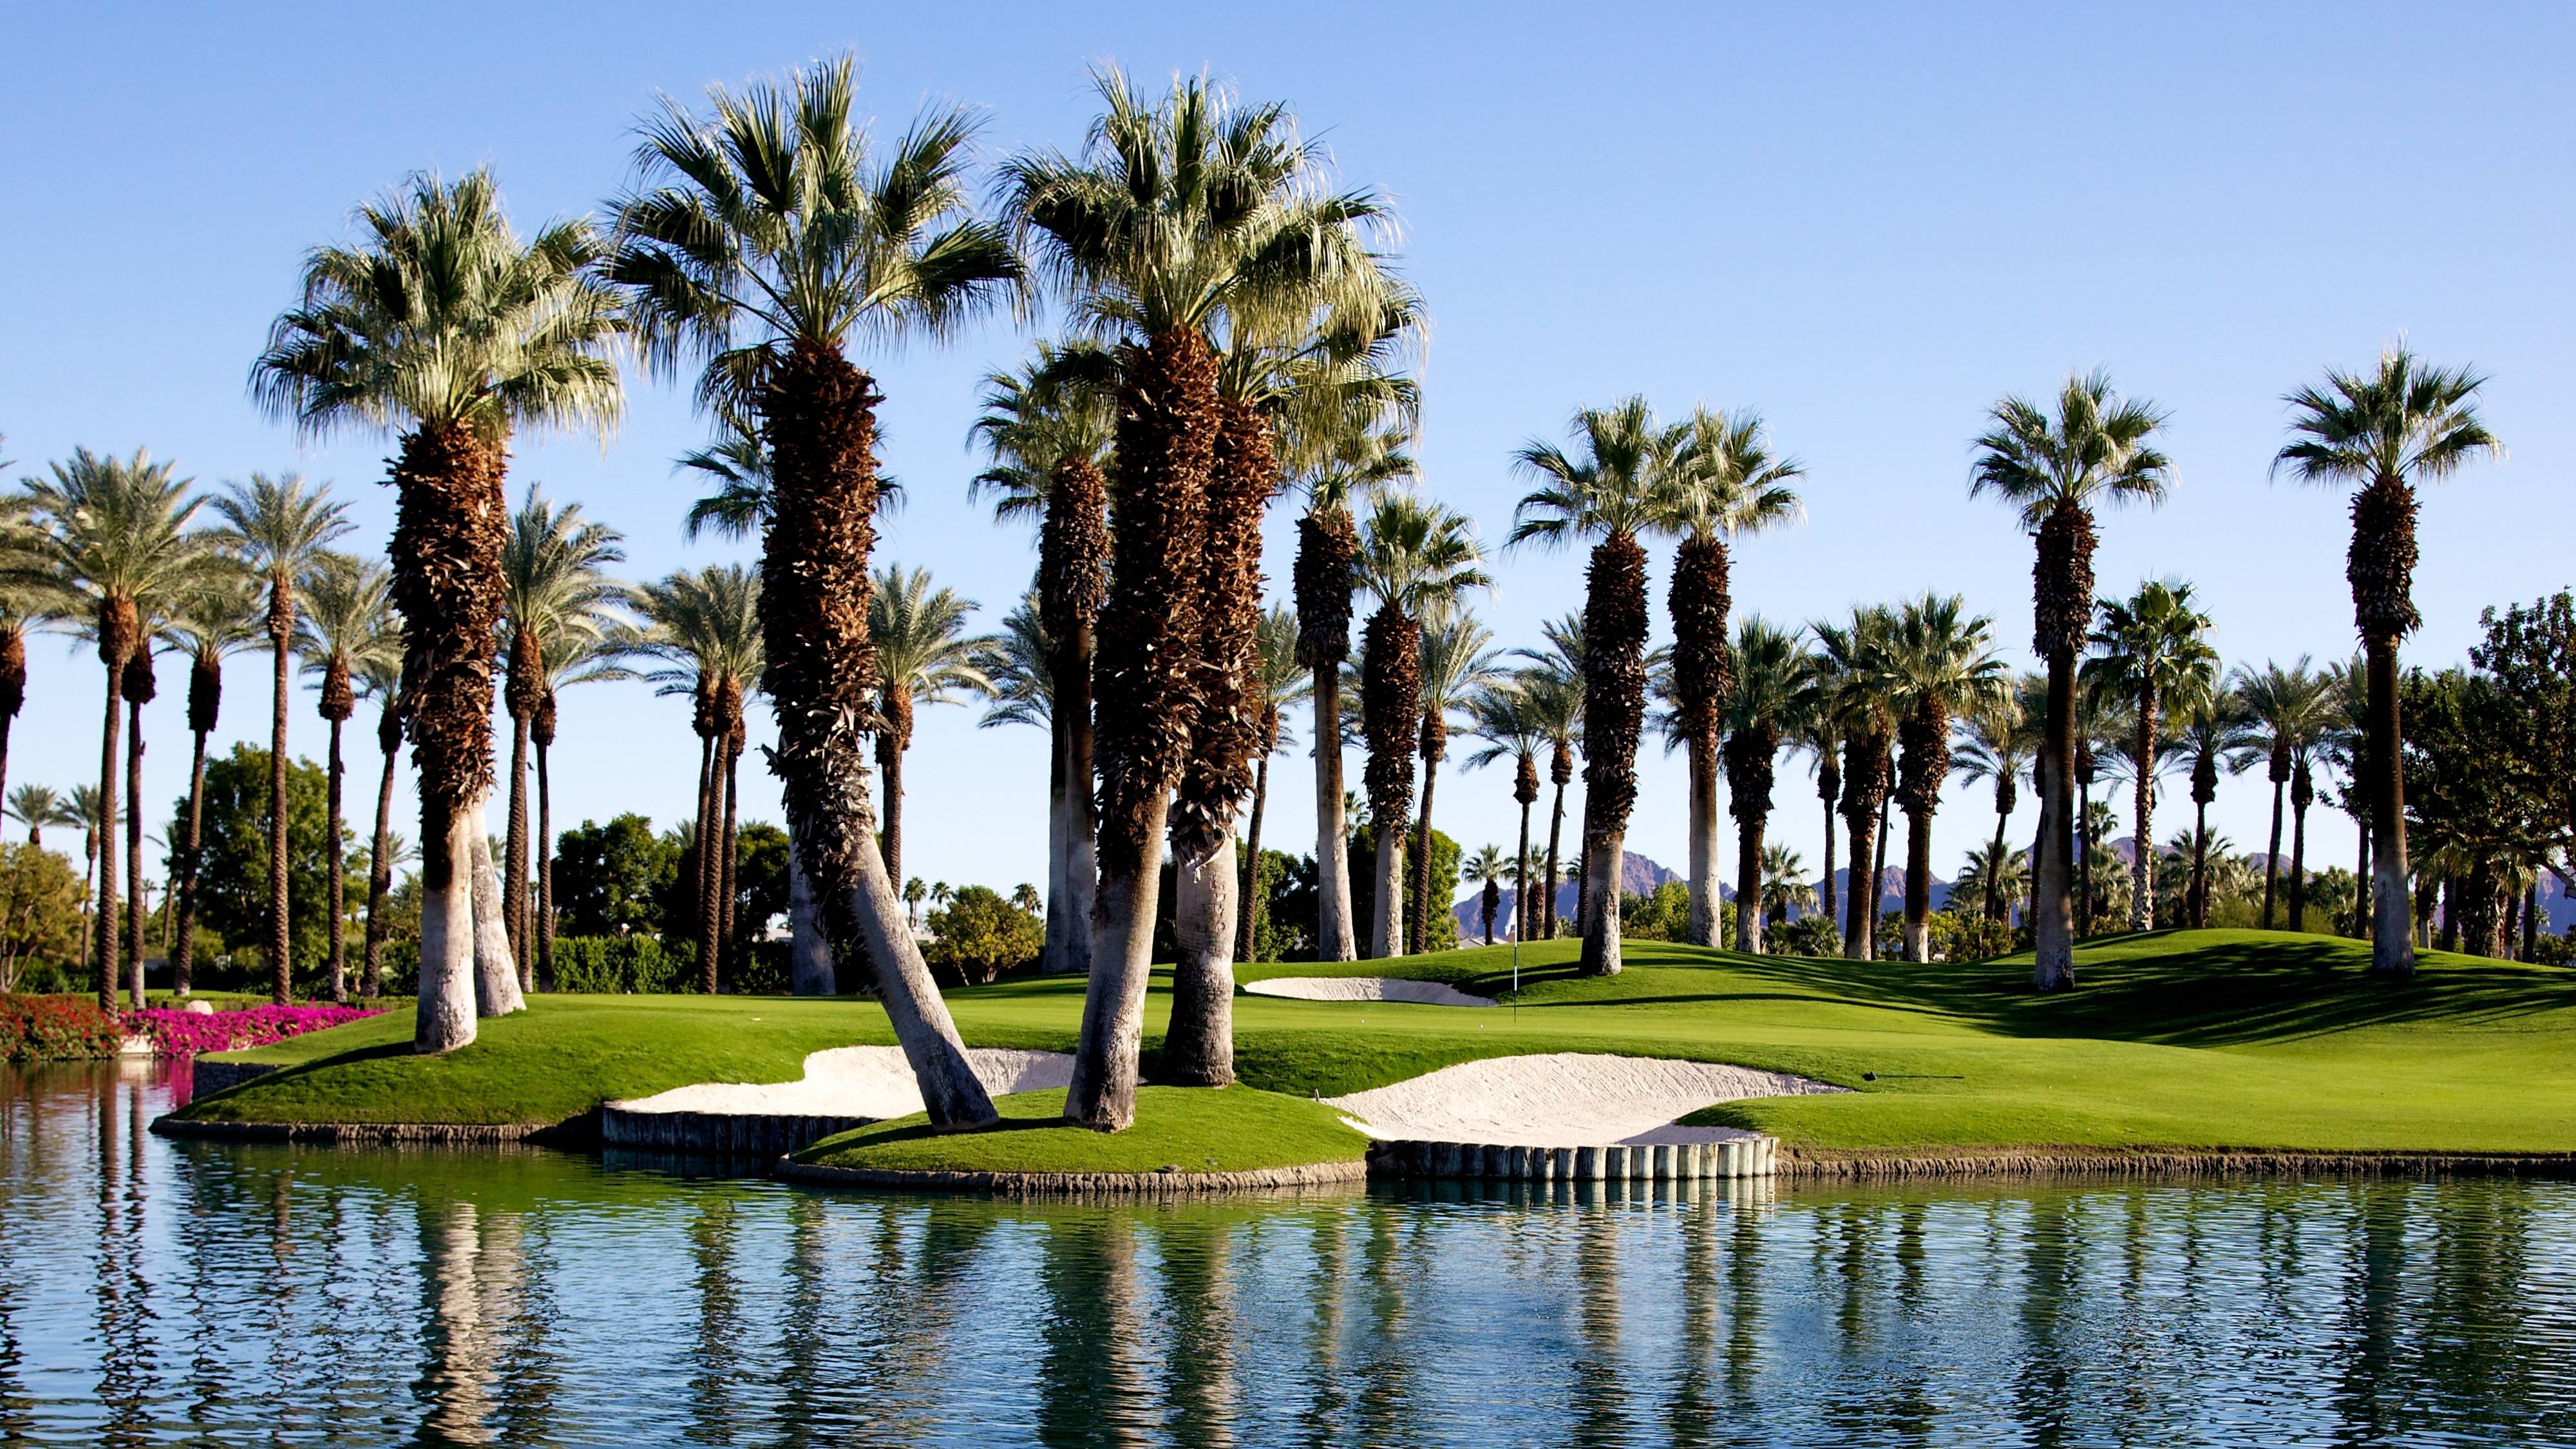 Golf course lake and palm trees